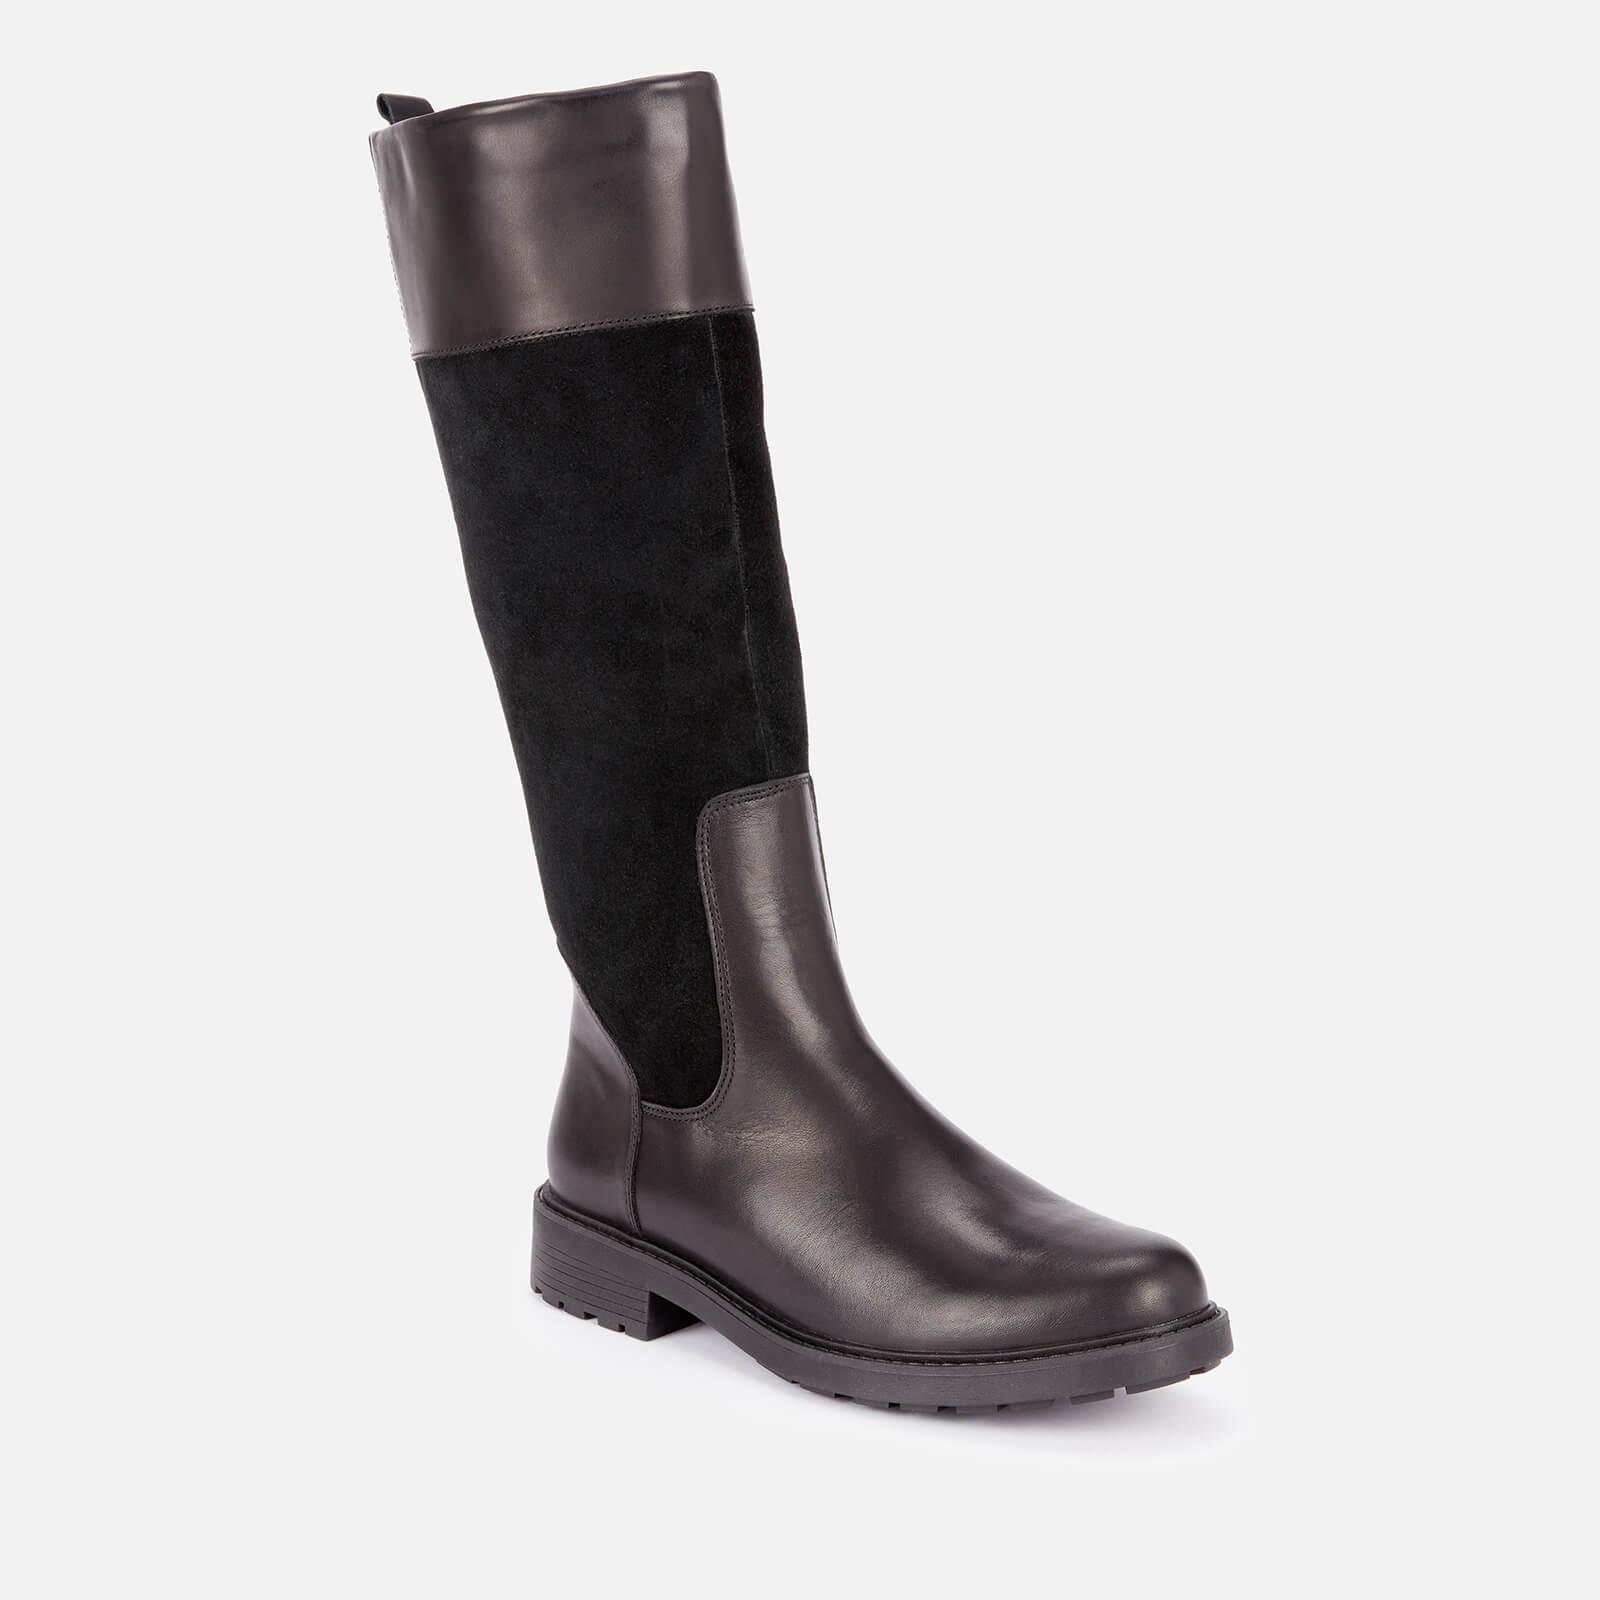 Clarks Orinoco 2 Hi Leather/warm Lined Knee High Boots in Black | Lyst